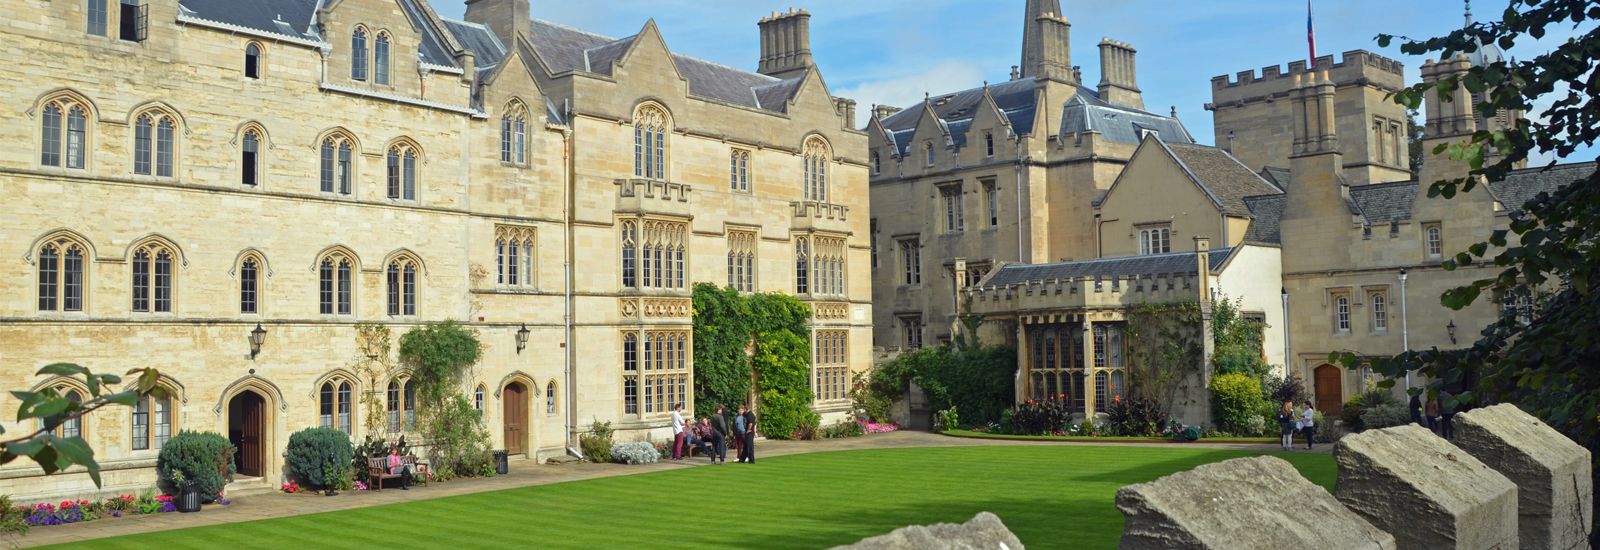 Oxford University, Pembroke College, and a Student Cell